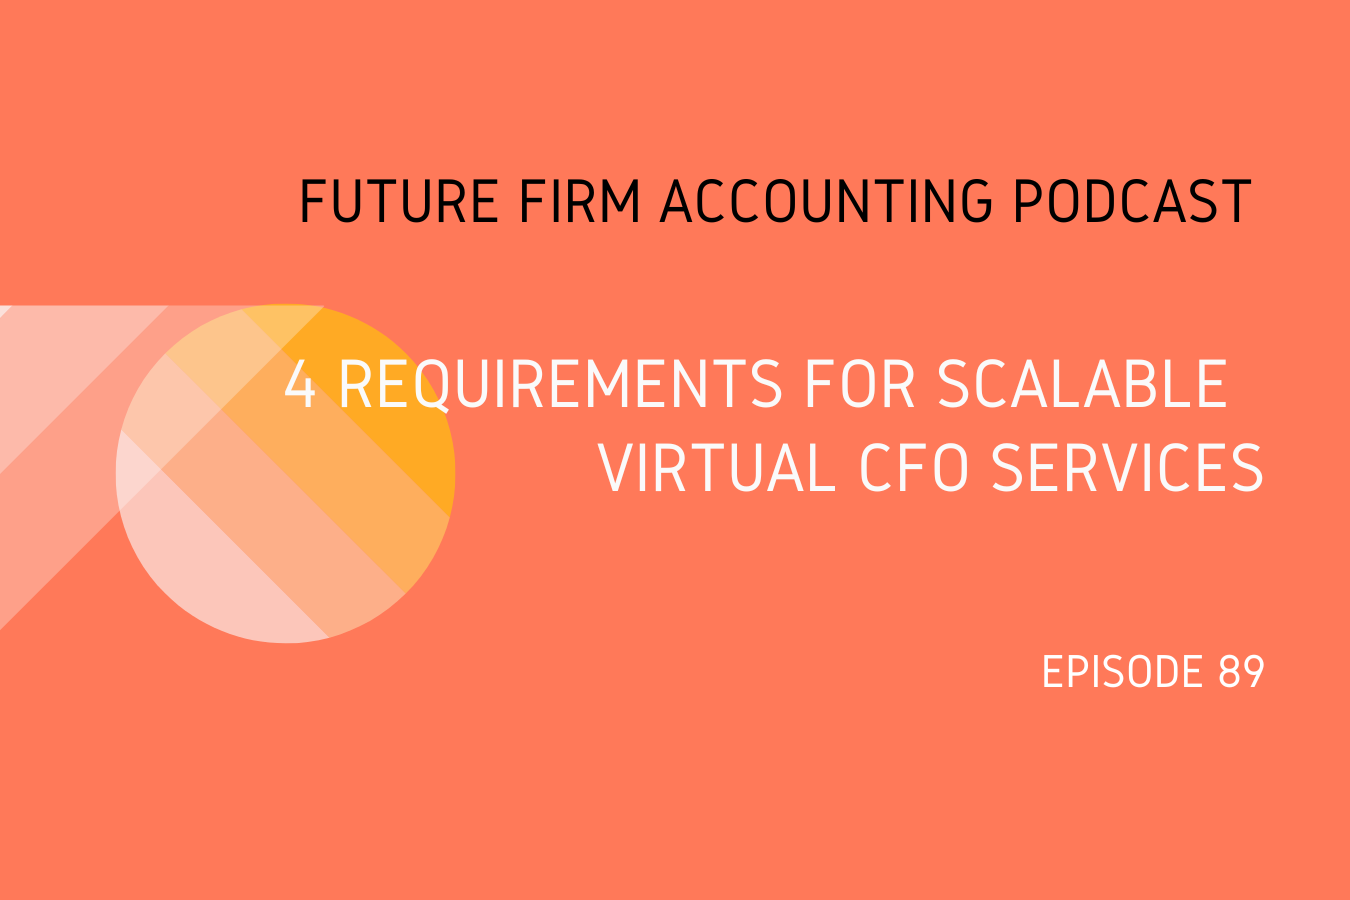 4 Requirements to Differentiate Your Virtual CFO Services